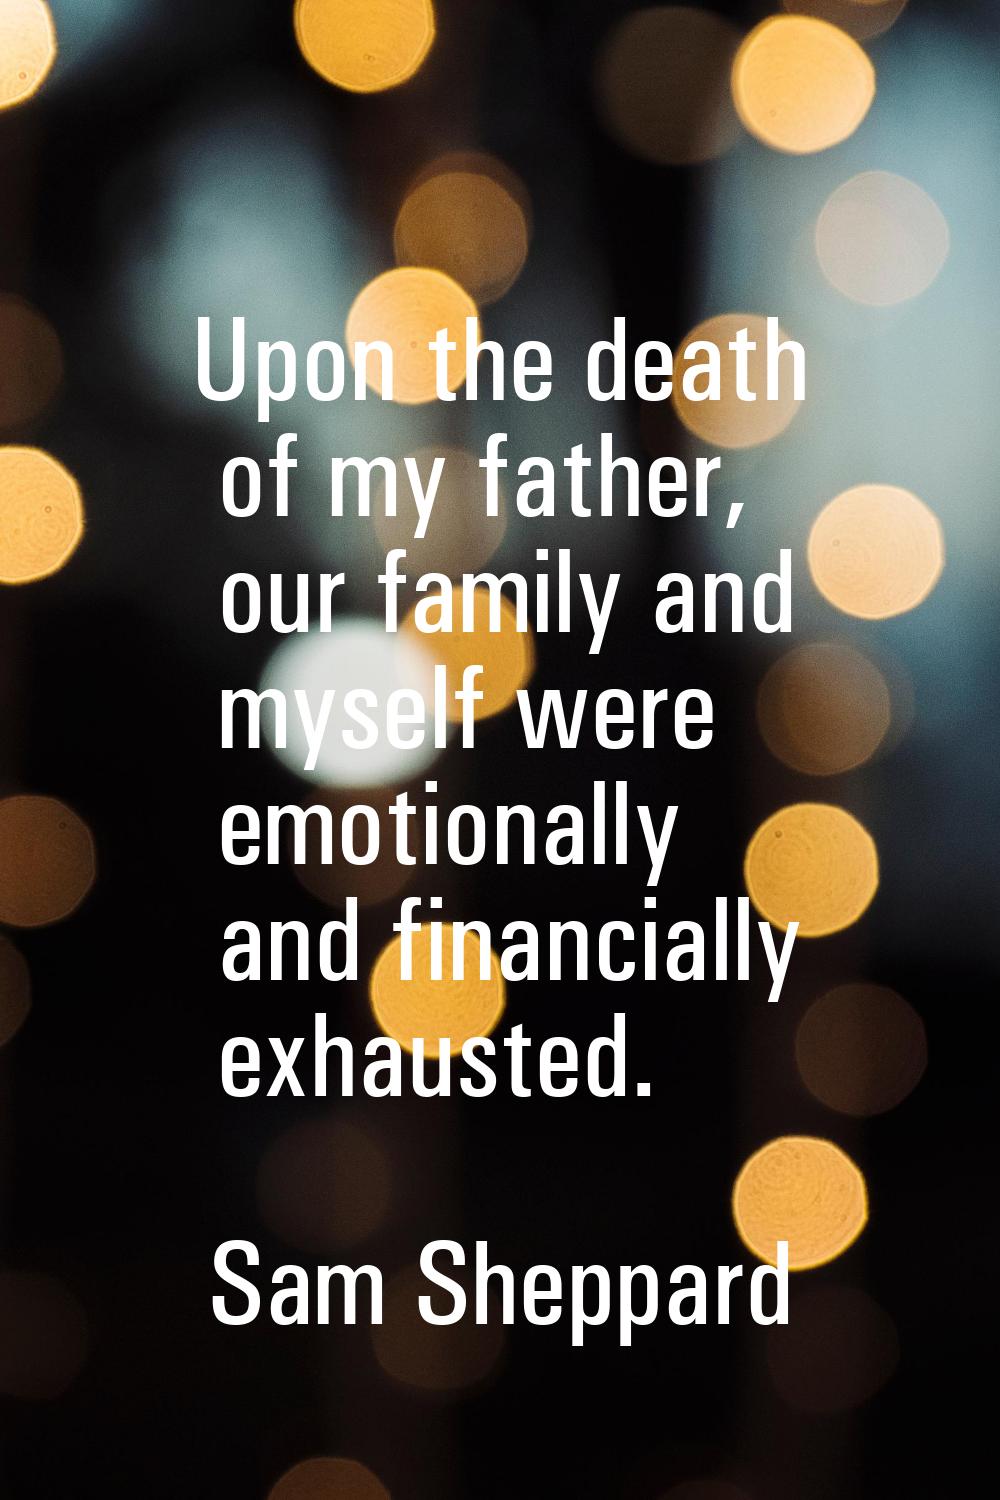 Upon the death of my father, our family and myself were emotionally and financially exhausted.